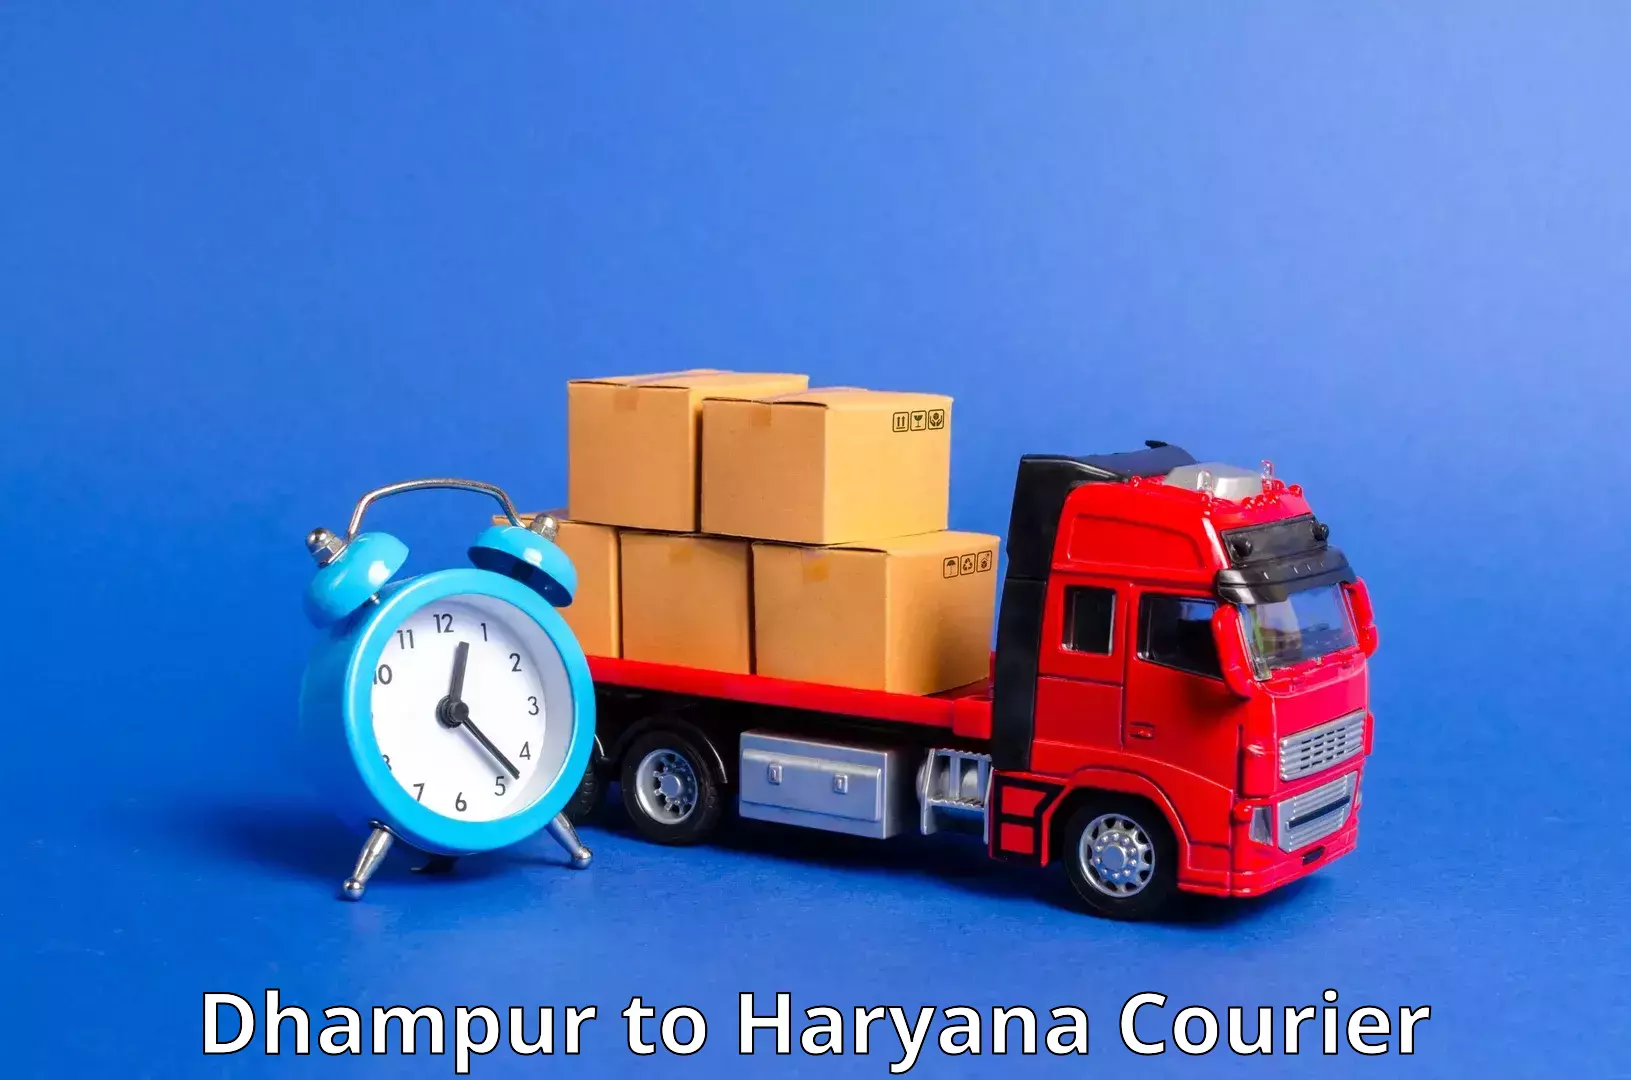 Reliable shipping partners Dhampur to Fatehabad